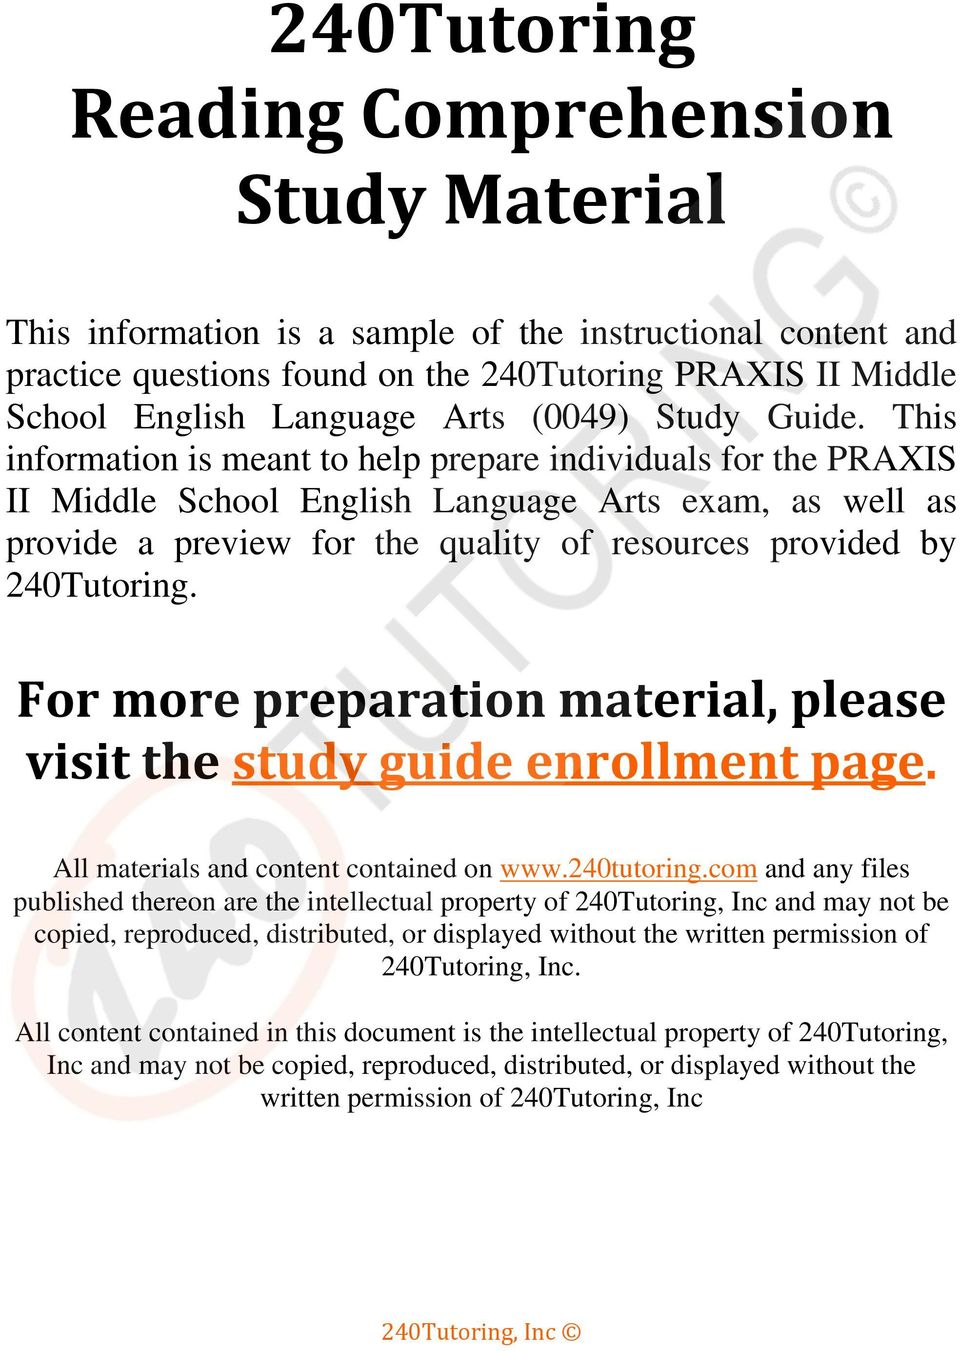 This information is meant to help prepare individuals for the PRAXIS II Middle School English Language Arts exam, as well as provide a preview for the quality of resources provided by 240Tutoring.